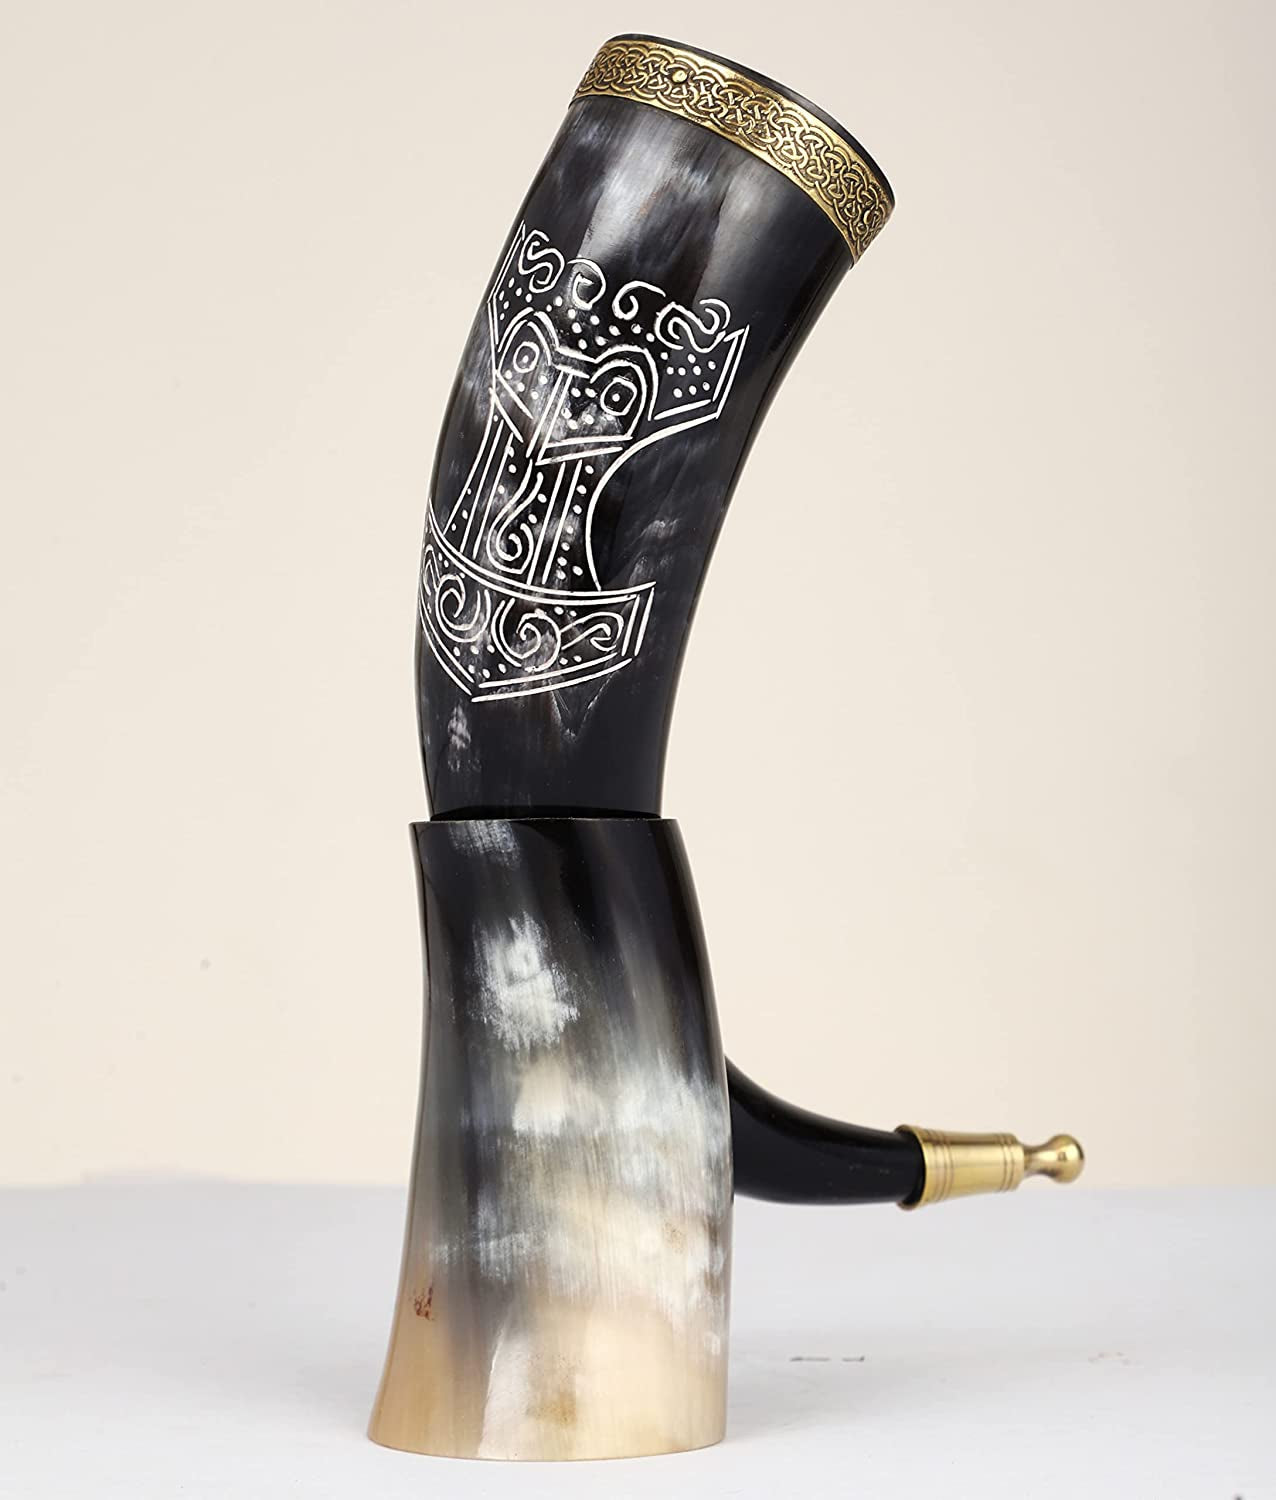 Viking Drinking Horn Mug | Handmade Drinking Horn with Mjolnir Engraved Tankard | Food Safe Medieval Game of Thrones Horn | For Hot & Cold Drink (1 Piece)